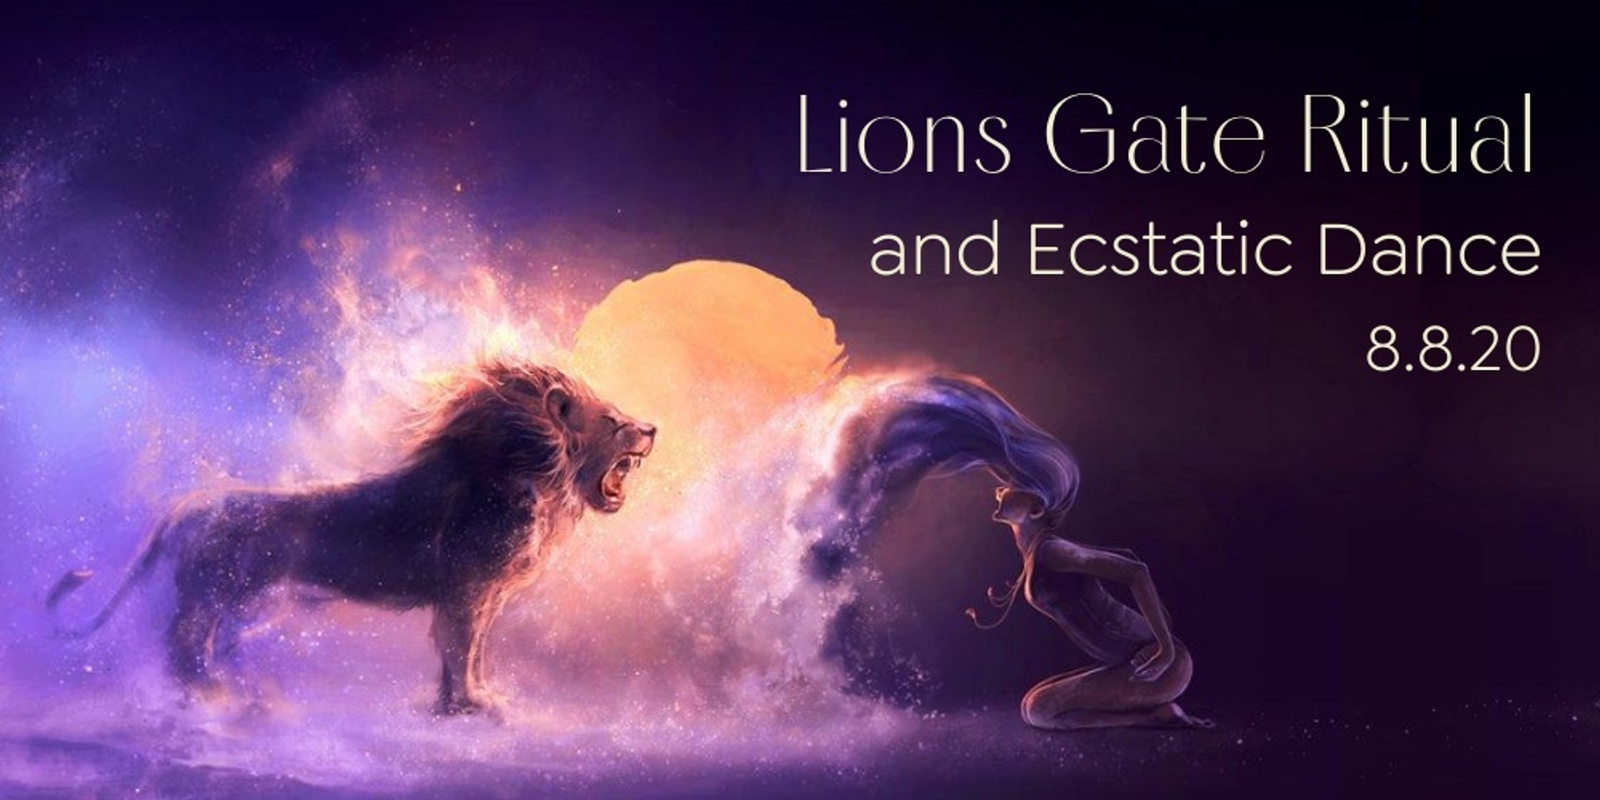 Lions Gate Ritual and Ecstatic Dance Online Humanitix